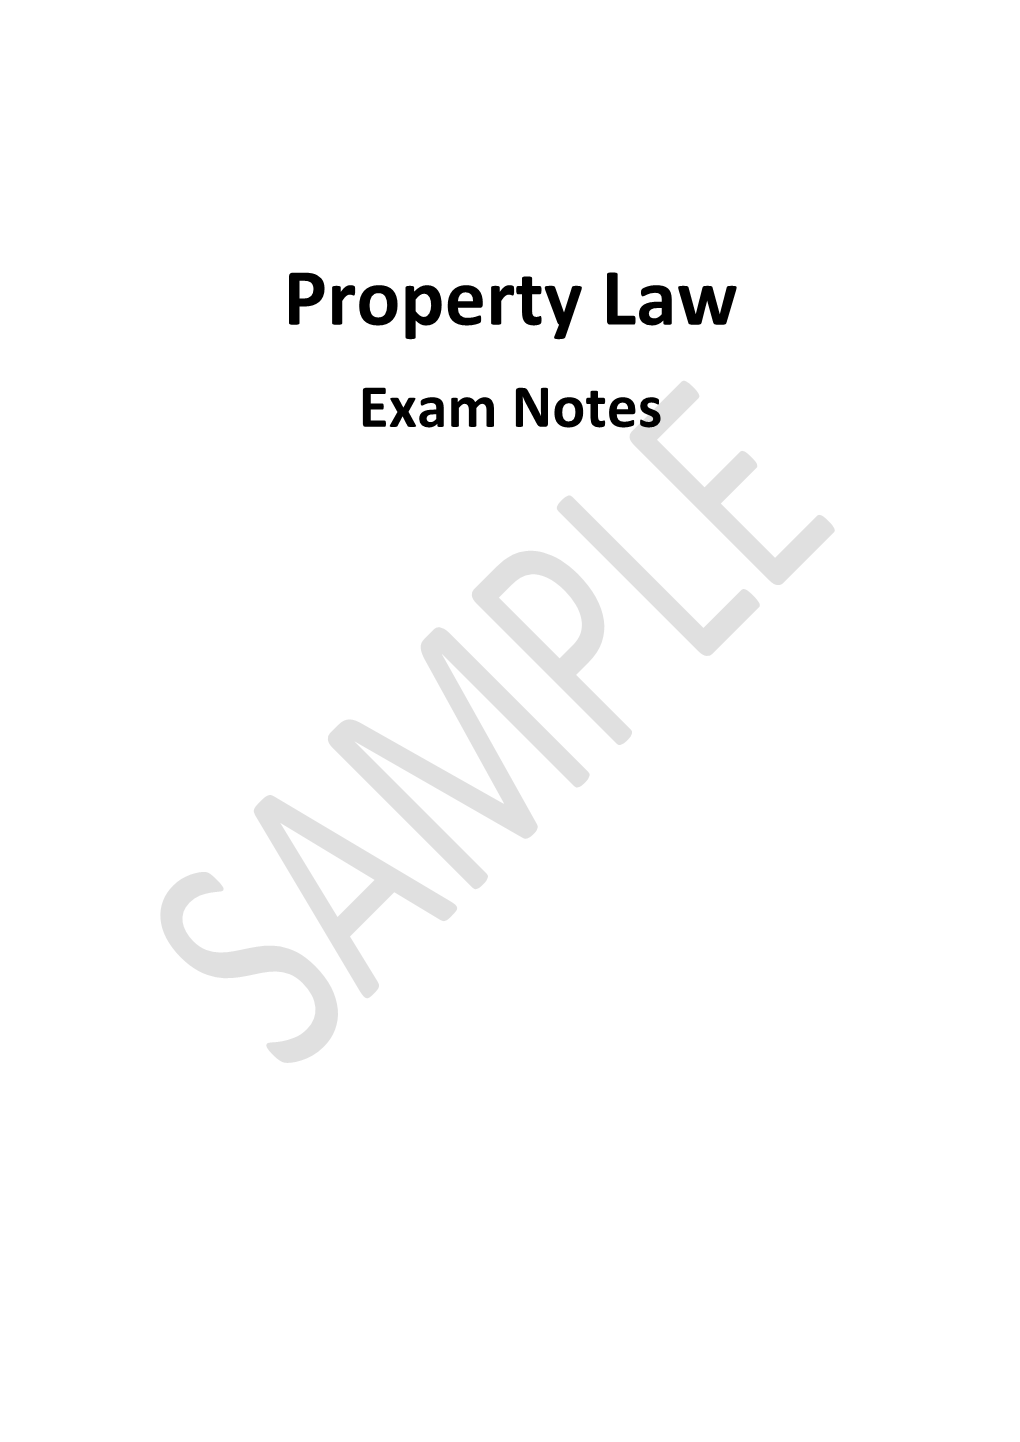 Property Law Exam Notes